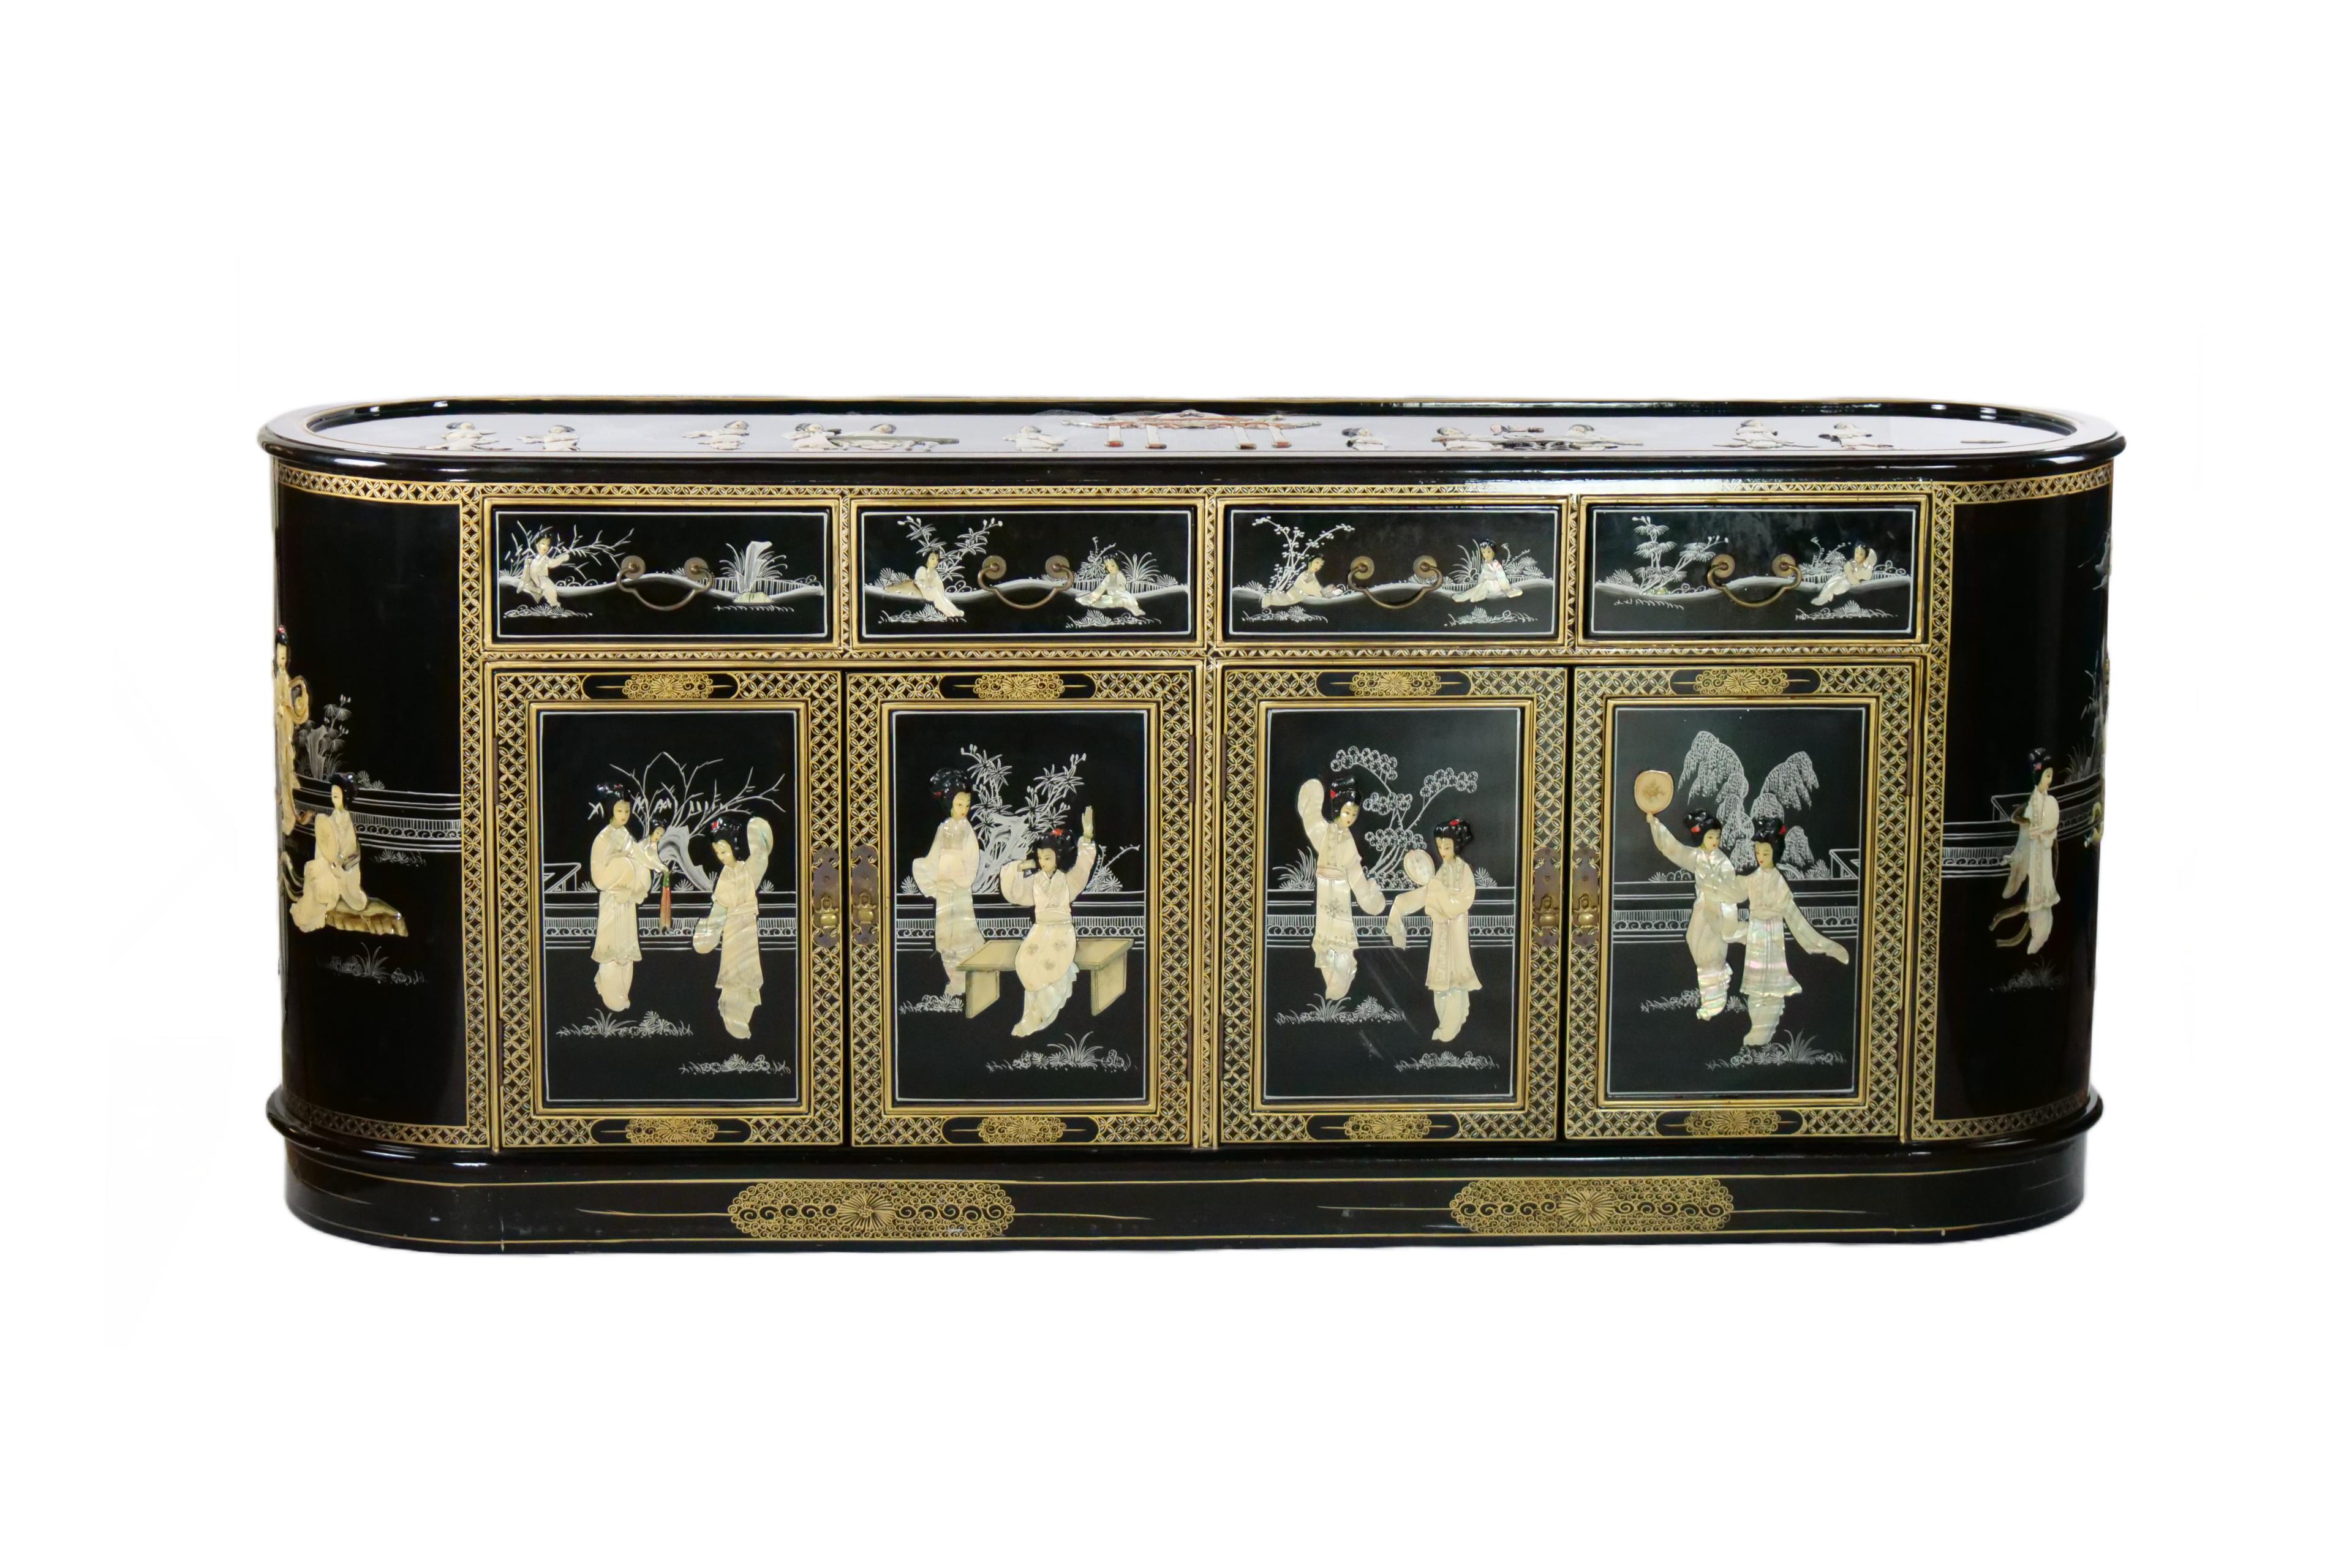 Beautifully hand painted and decorated black lacquered wood chinoiserie scene detail sideboard / credenza. The sideboard features four front pull top drawer resting on four double bottom door. Each drawer is lined with green velvet fabric. The